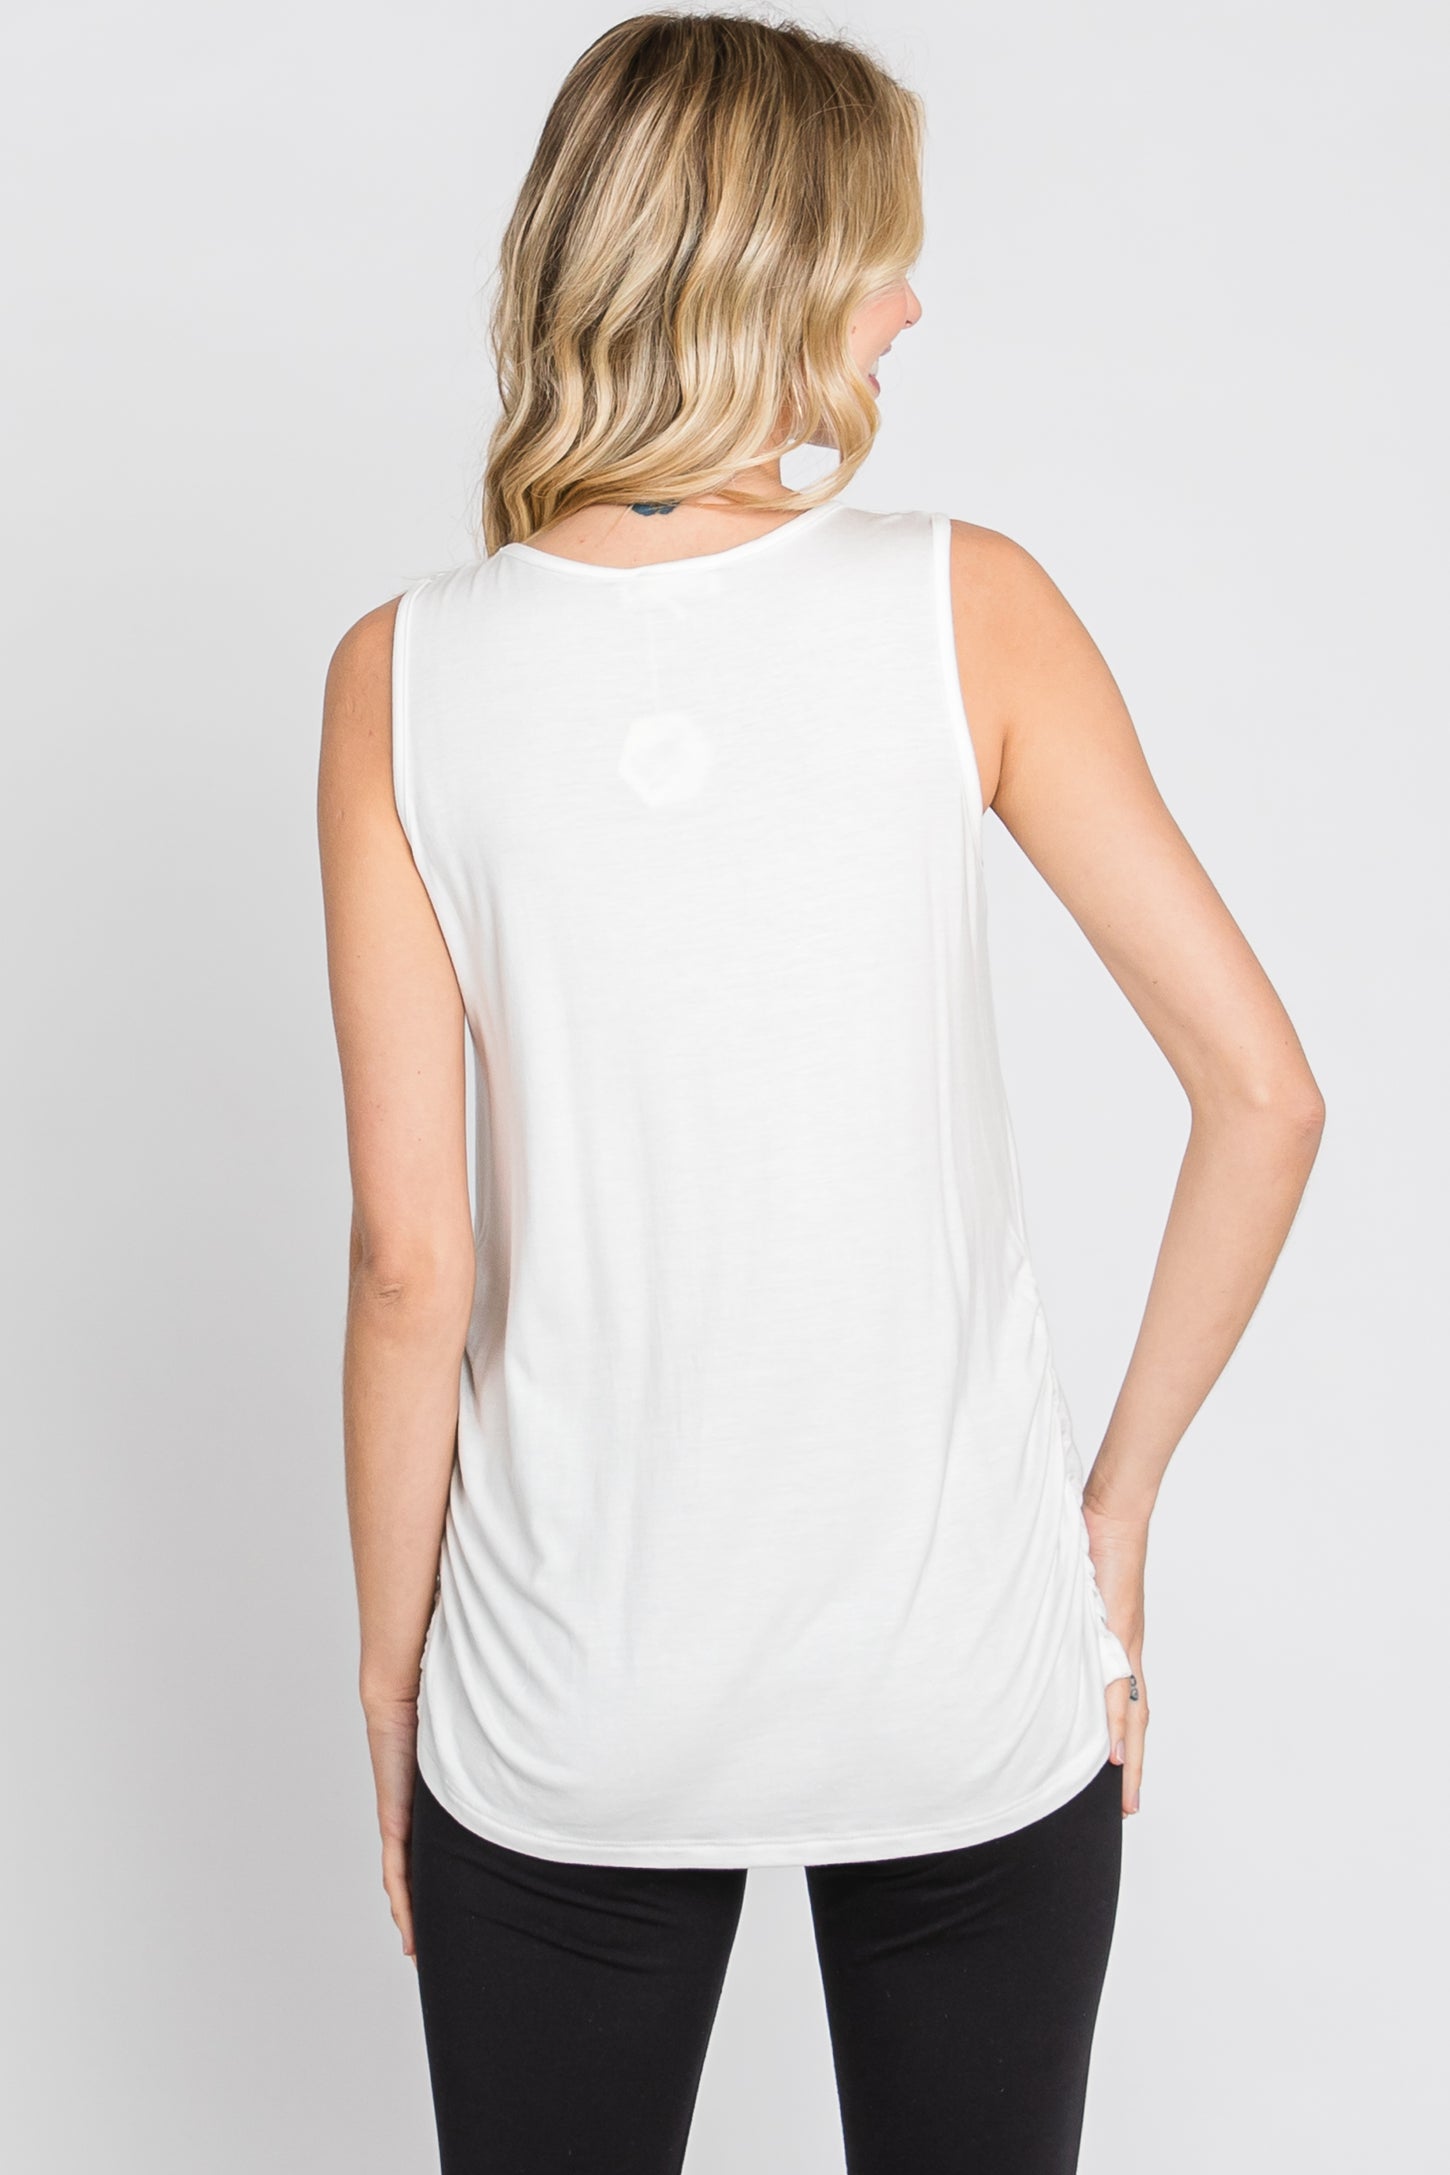 Ivory Sleeveless Ruched Top